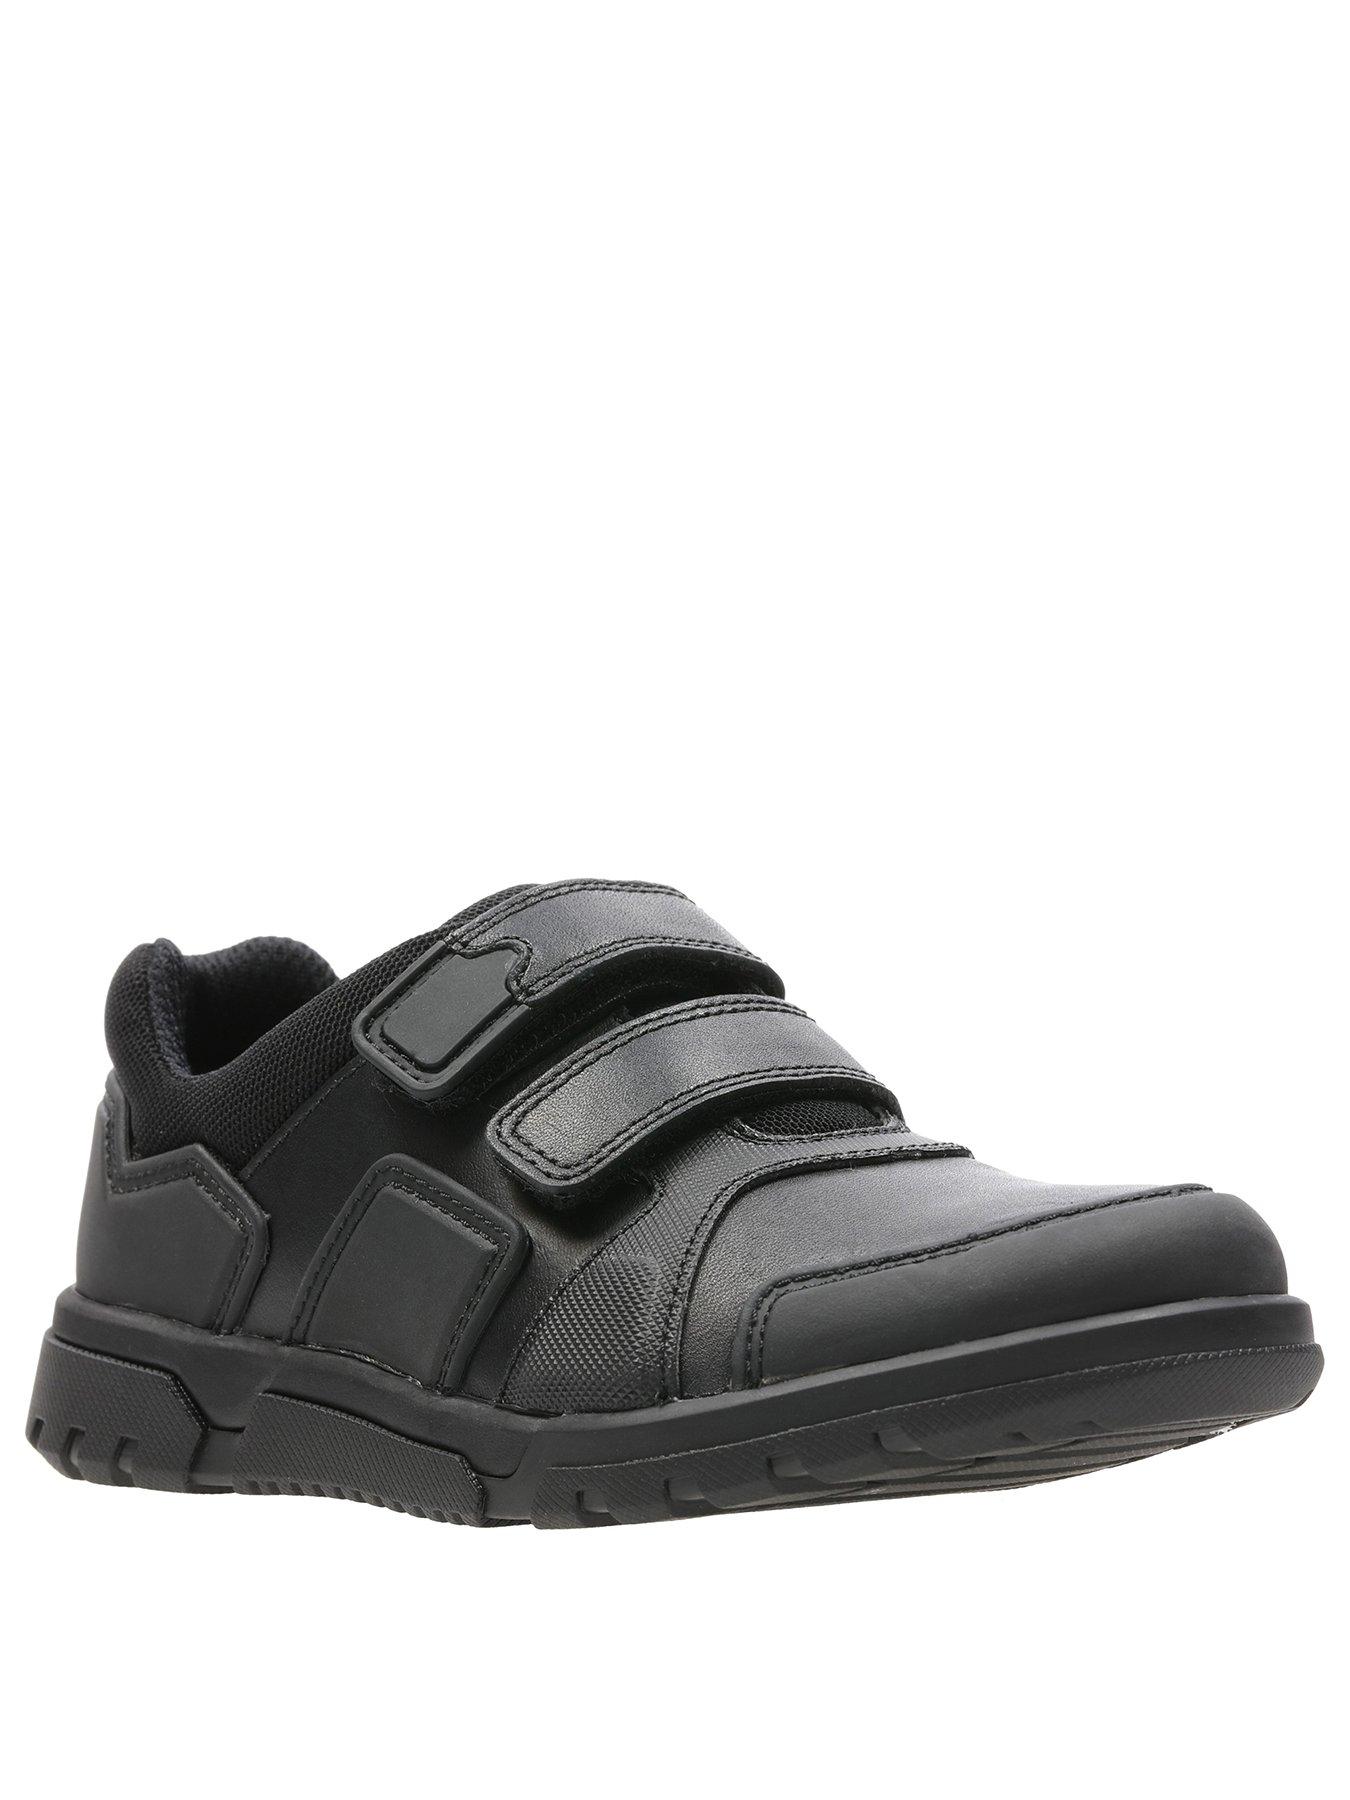 clarks toddler school shoes